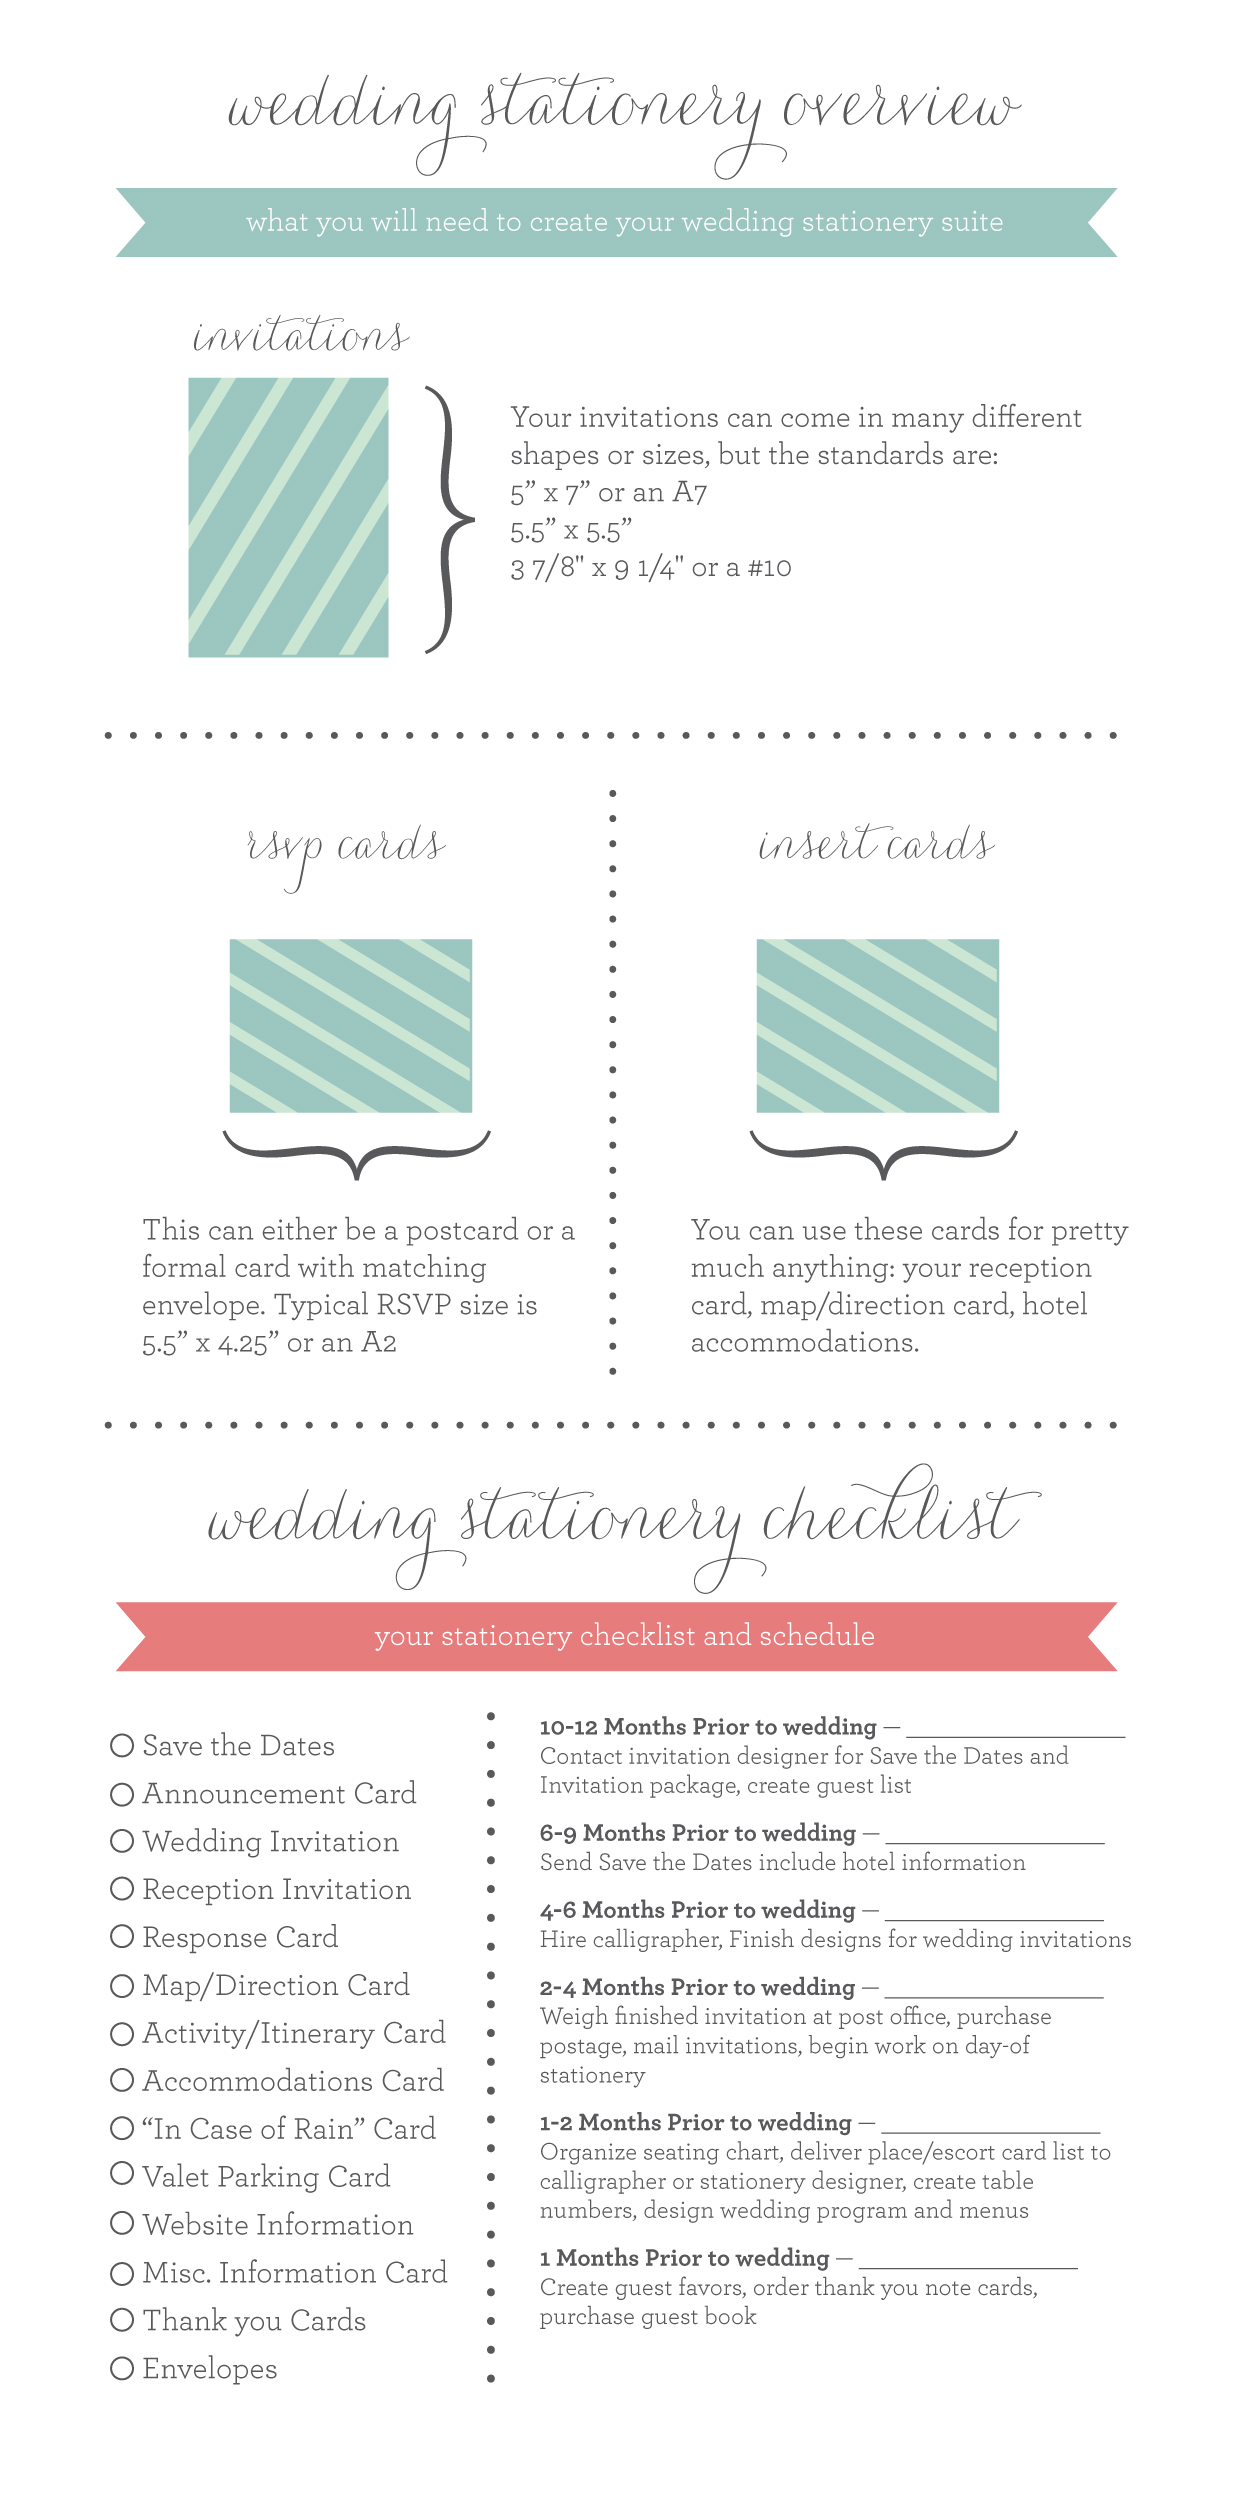 A Stationery Overview + Calligraphy Giveaway! via TheELD.com